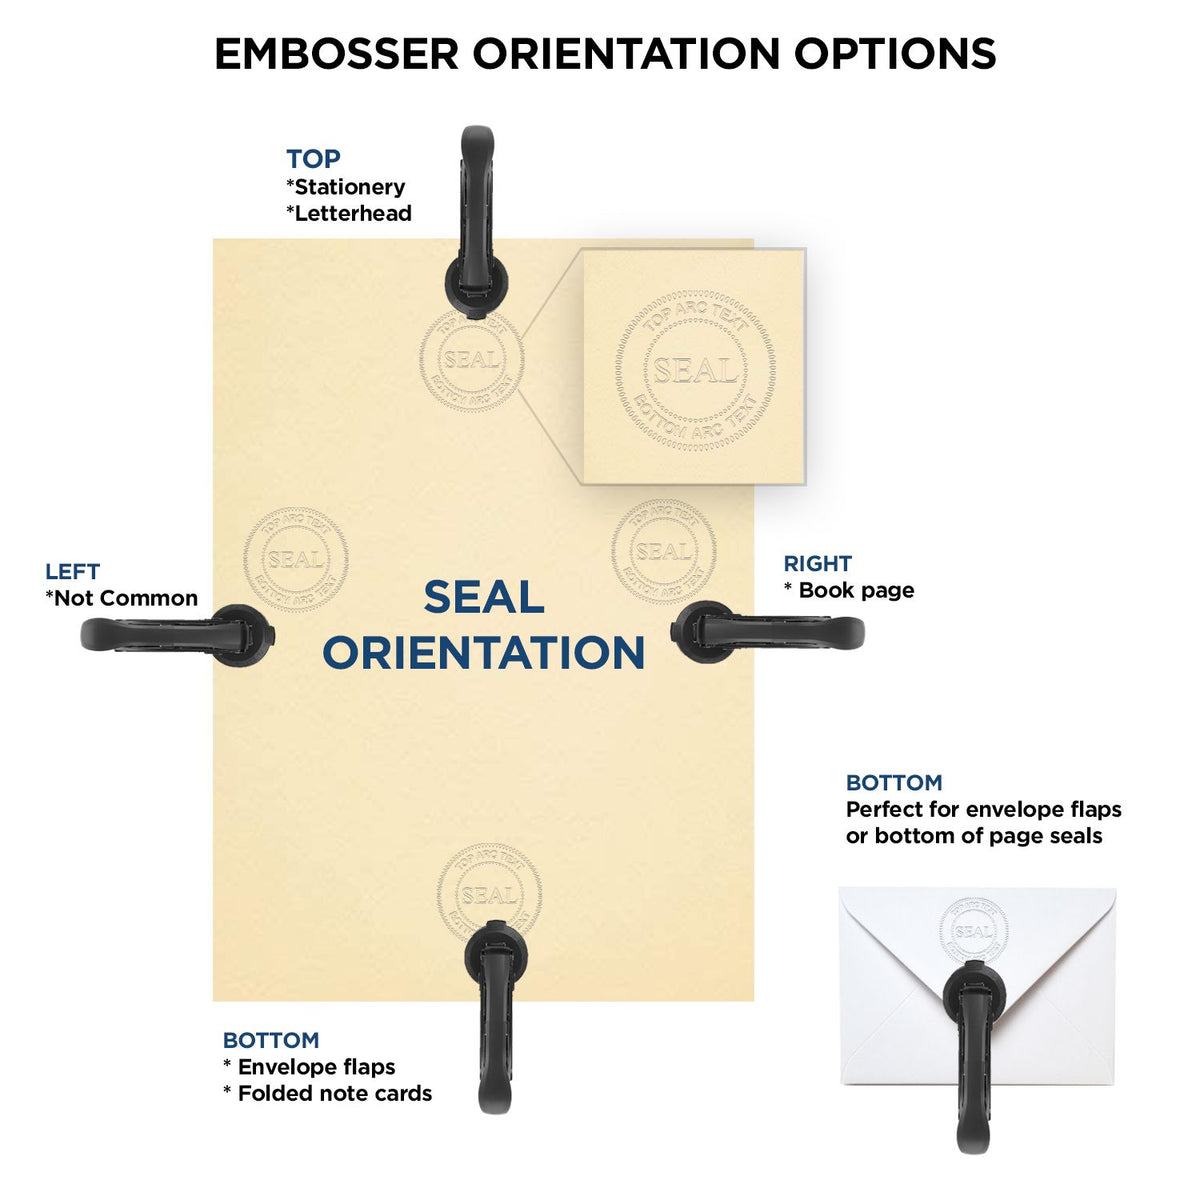 An infographic for the State of Montana Extended Long Reach Geologist Seal showing embosser orientation, this is showing examples of a top, bottom, right and left insert.